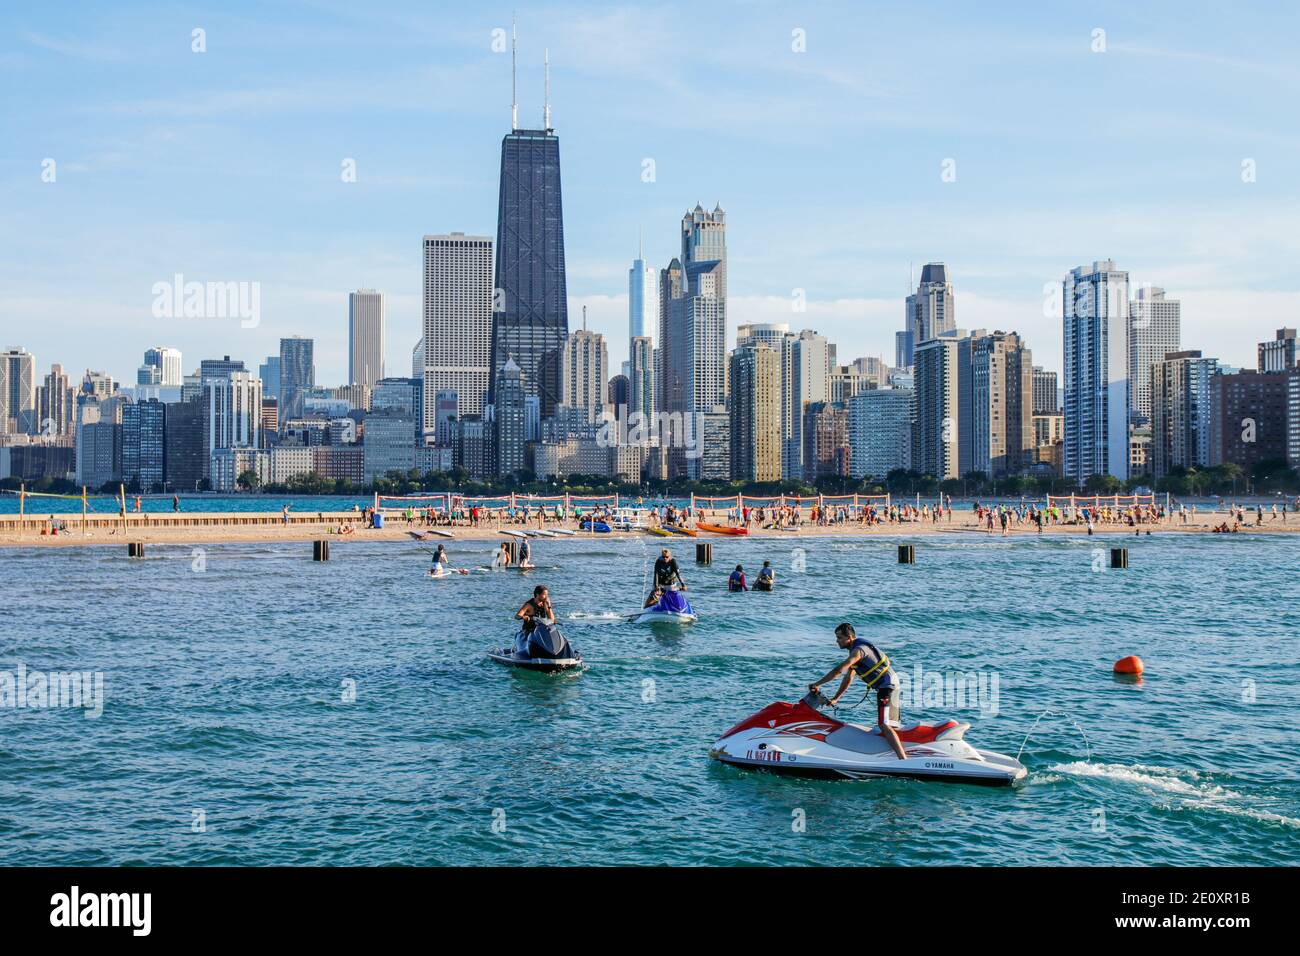 Personal watercraft, North Avenue Beach, Chicago skyline in background Stock Photo